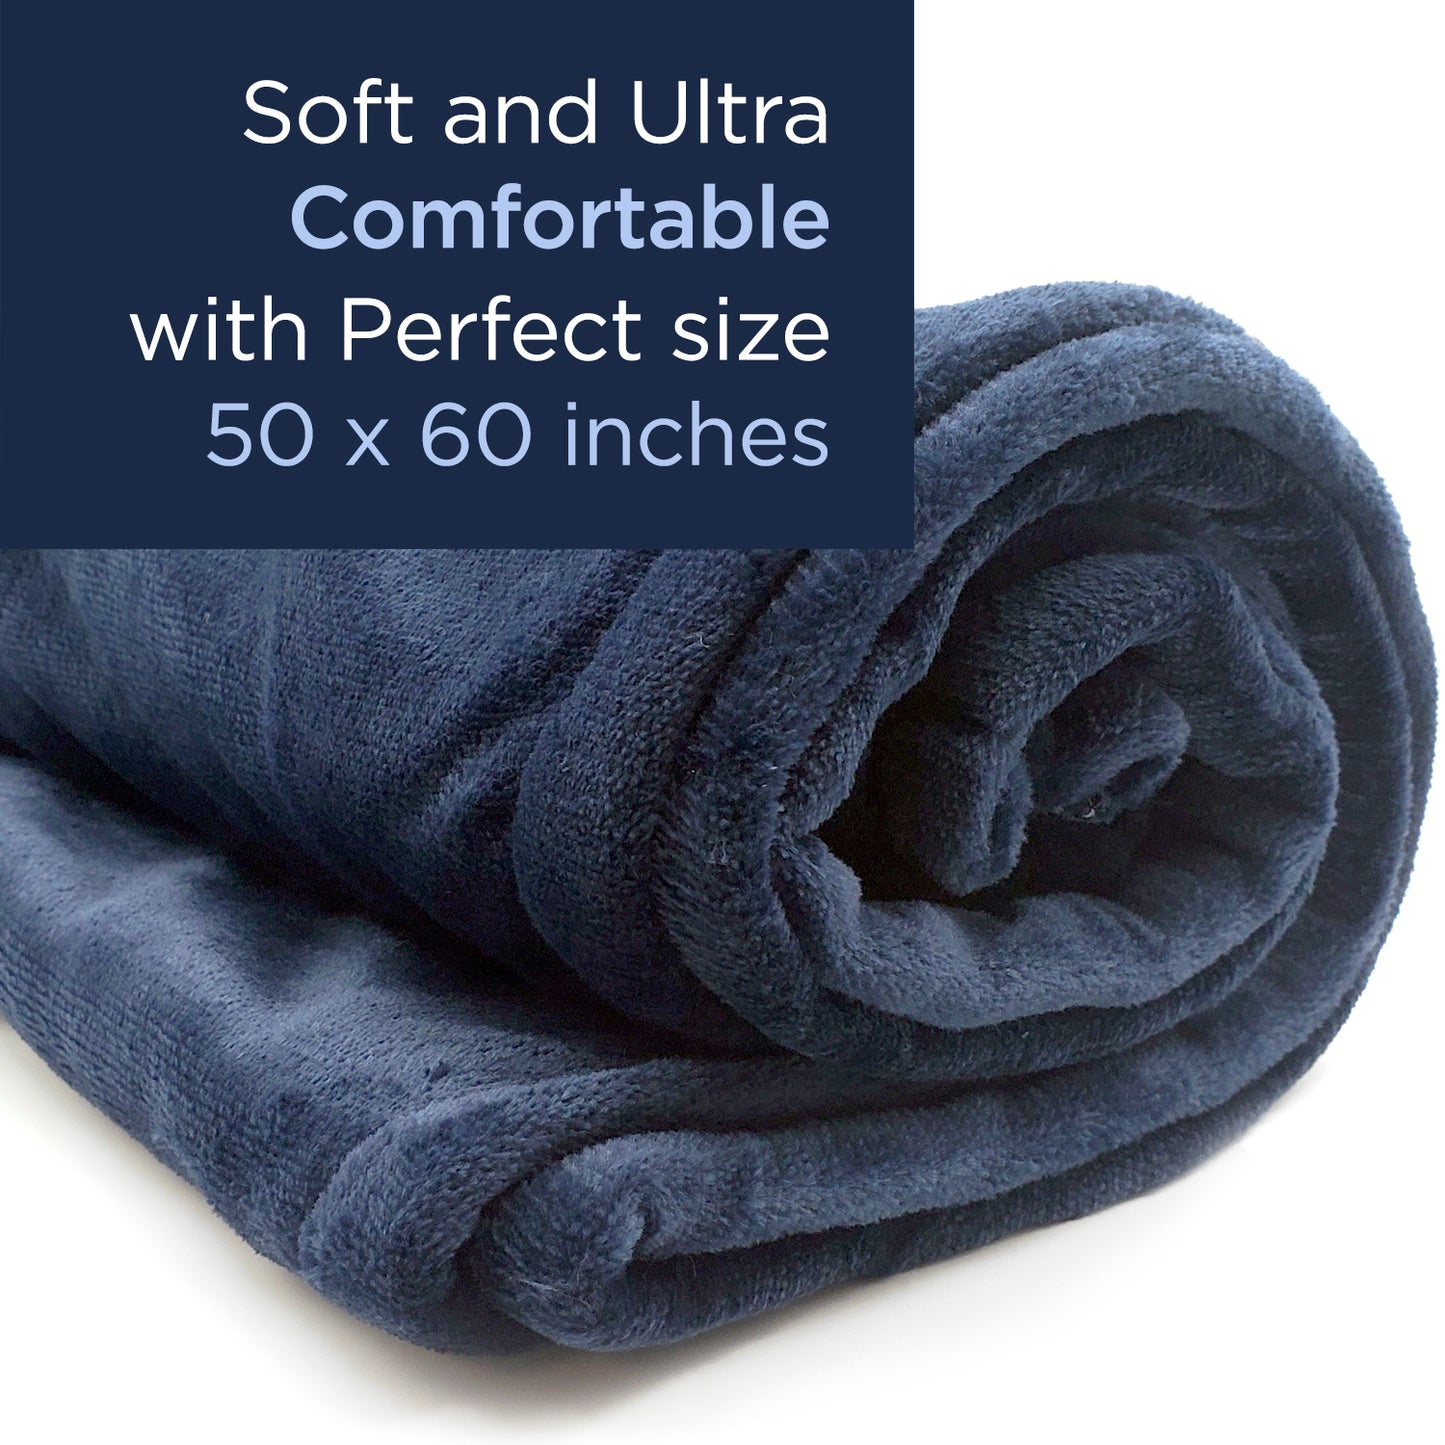 Dr Relief by SUNAID Electric Heated Throw Blanket Fleece with Controller, 4 Hours Auto Shut-Off, Fast Warming, Full-Body Comfort, Luxuriously Soft, Machine Washable, 50" x 60", Micromink for Cozy Couch or Bed (Navy)